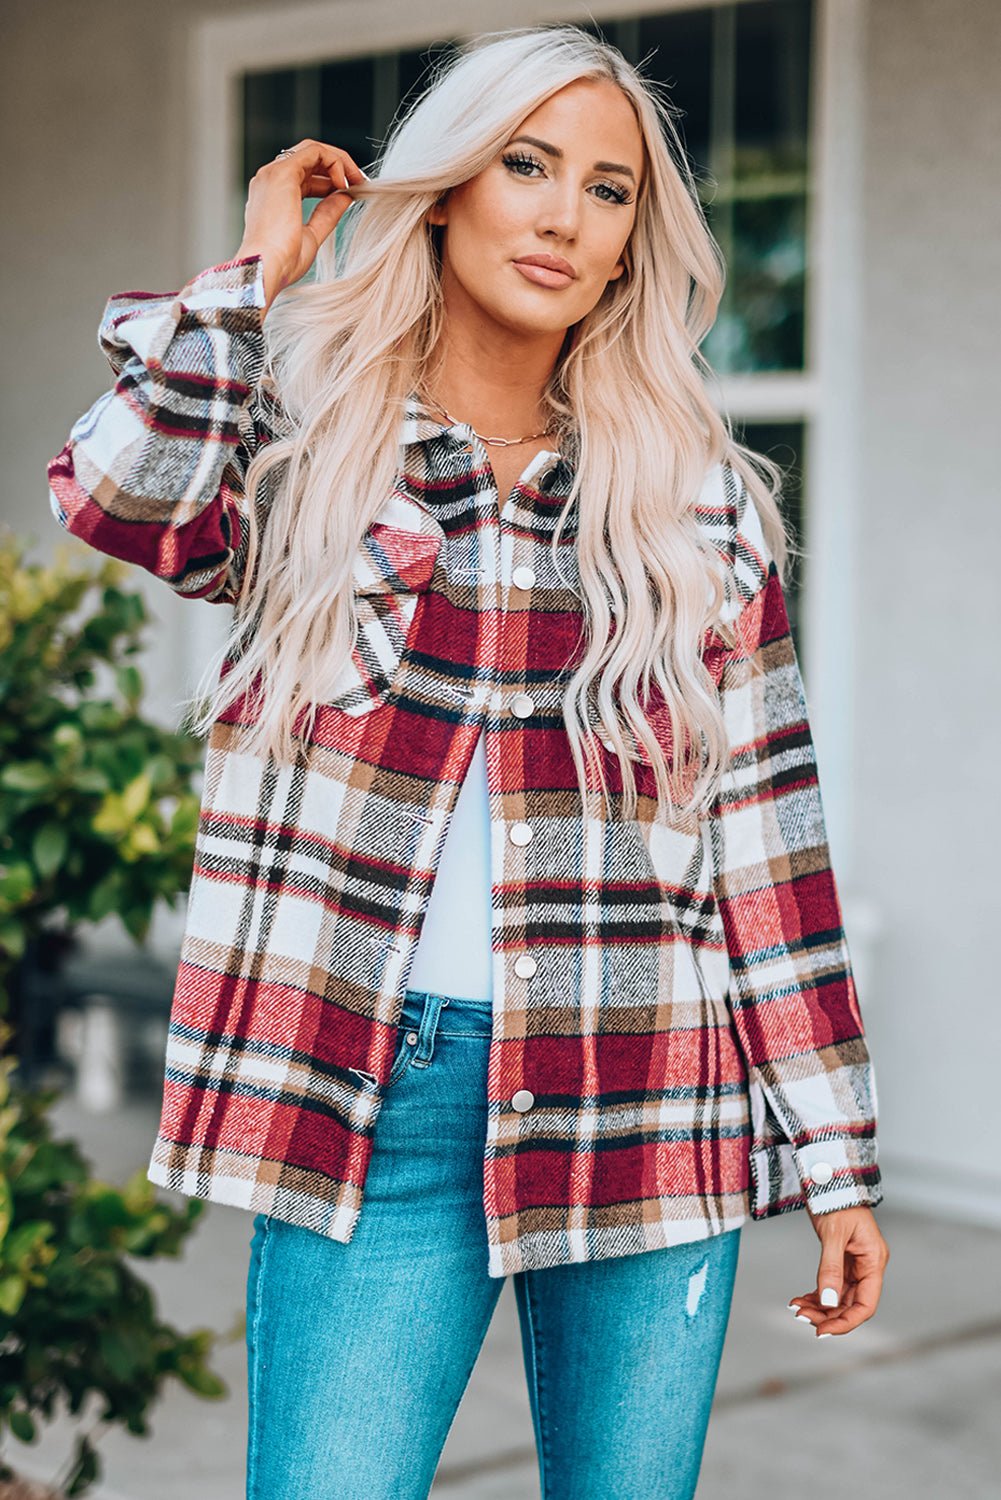 Plaid Button Front Shirt Jacket with Breast Pockets  | KIKI COUTURE-Women's Clothing, Designer Fashions, Shoes, Bags